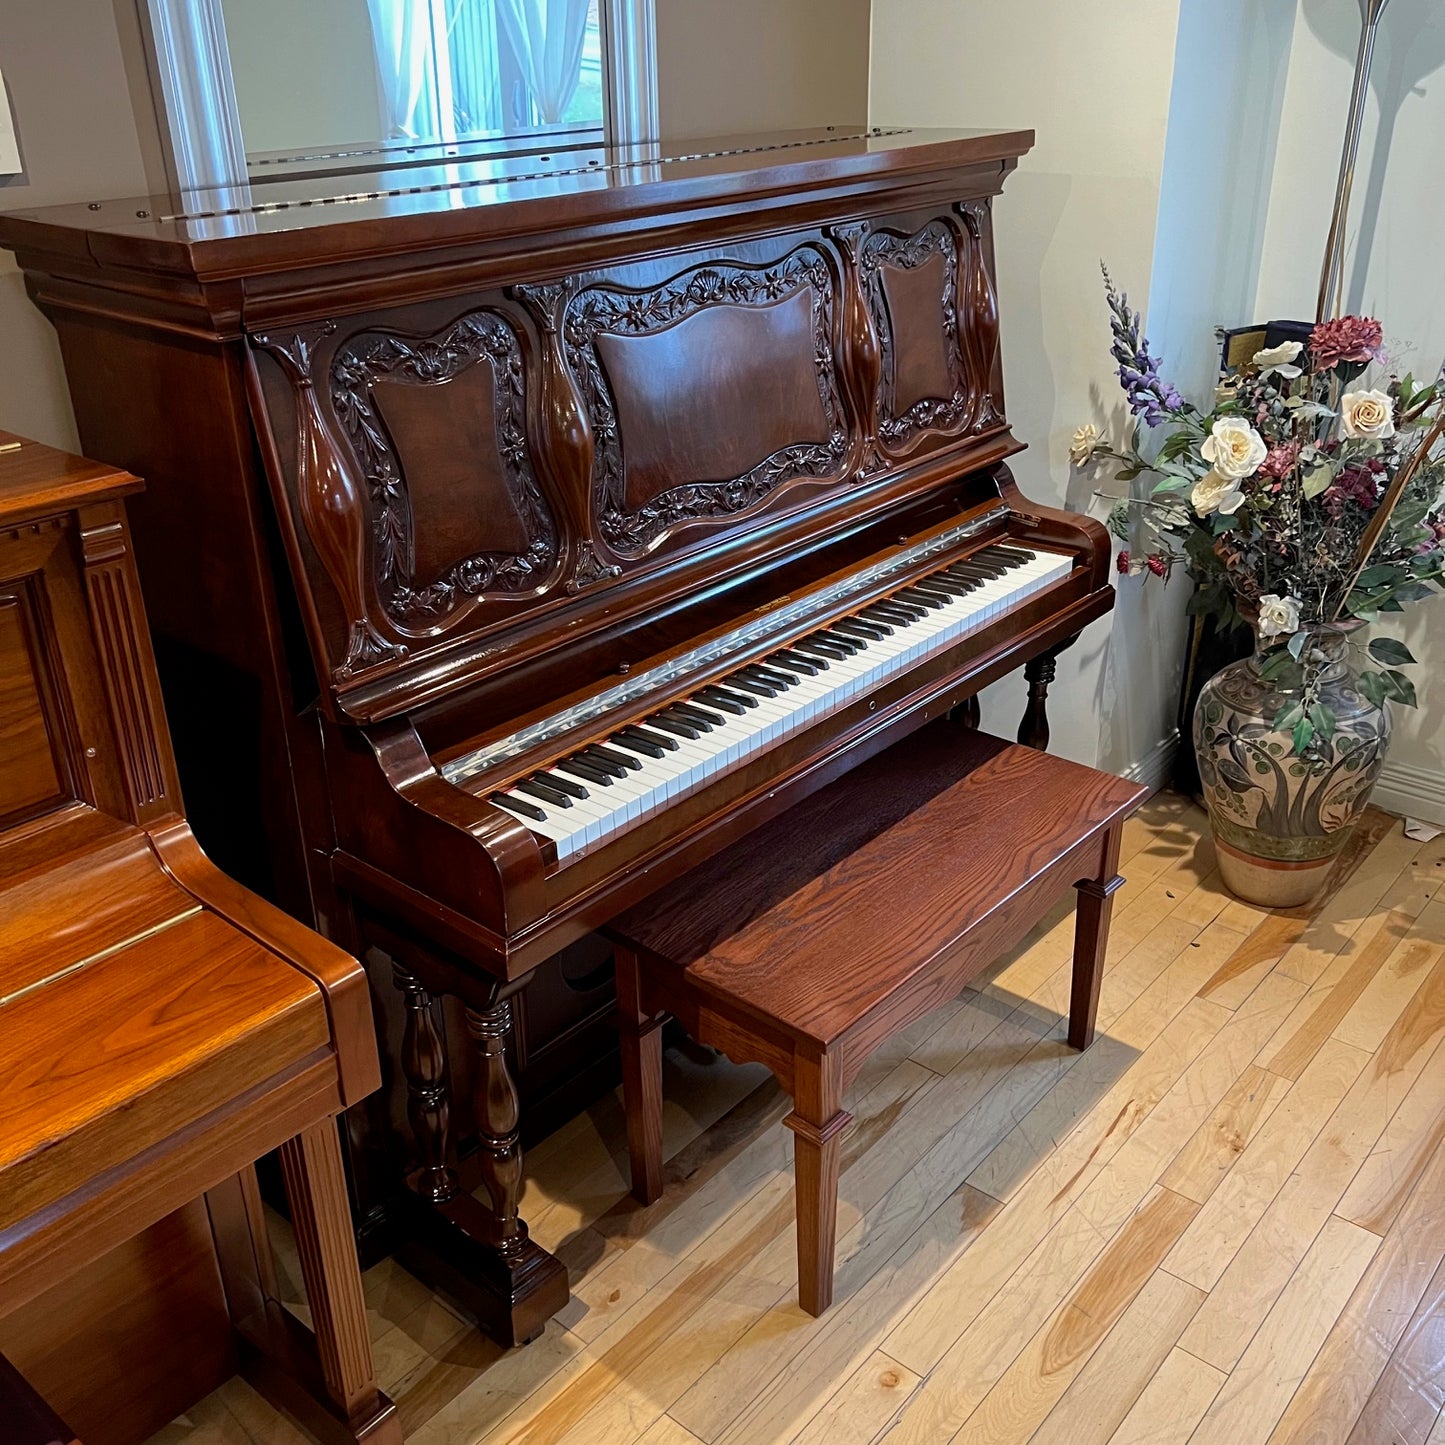 Ludwig century-old upright piano